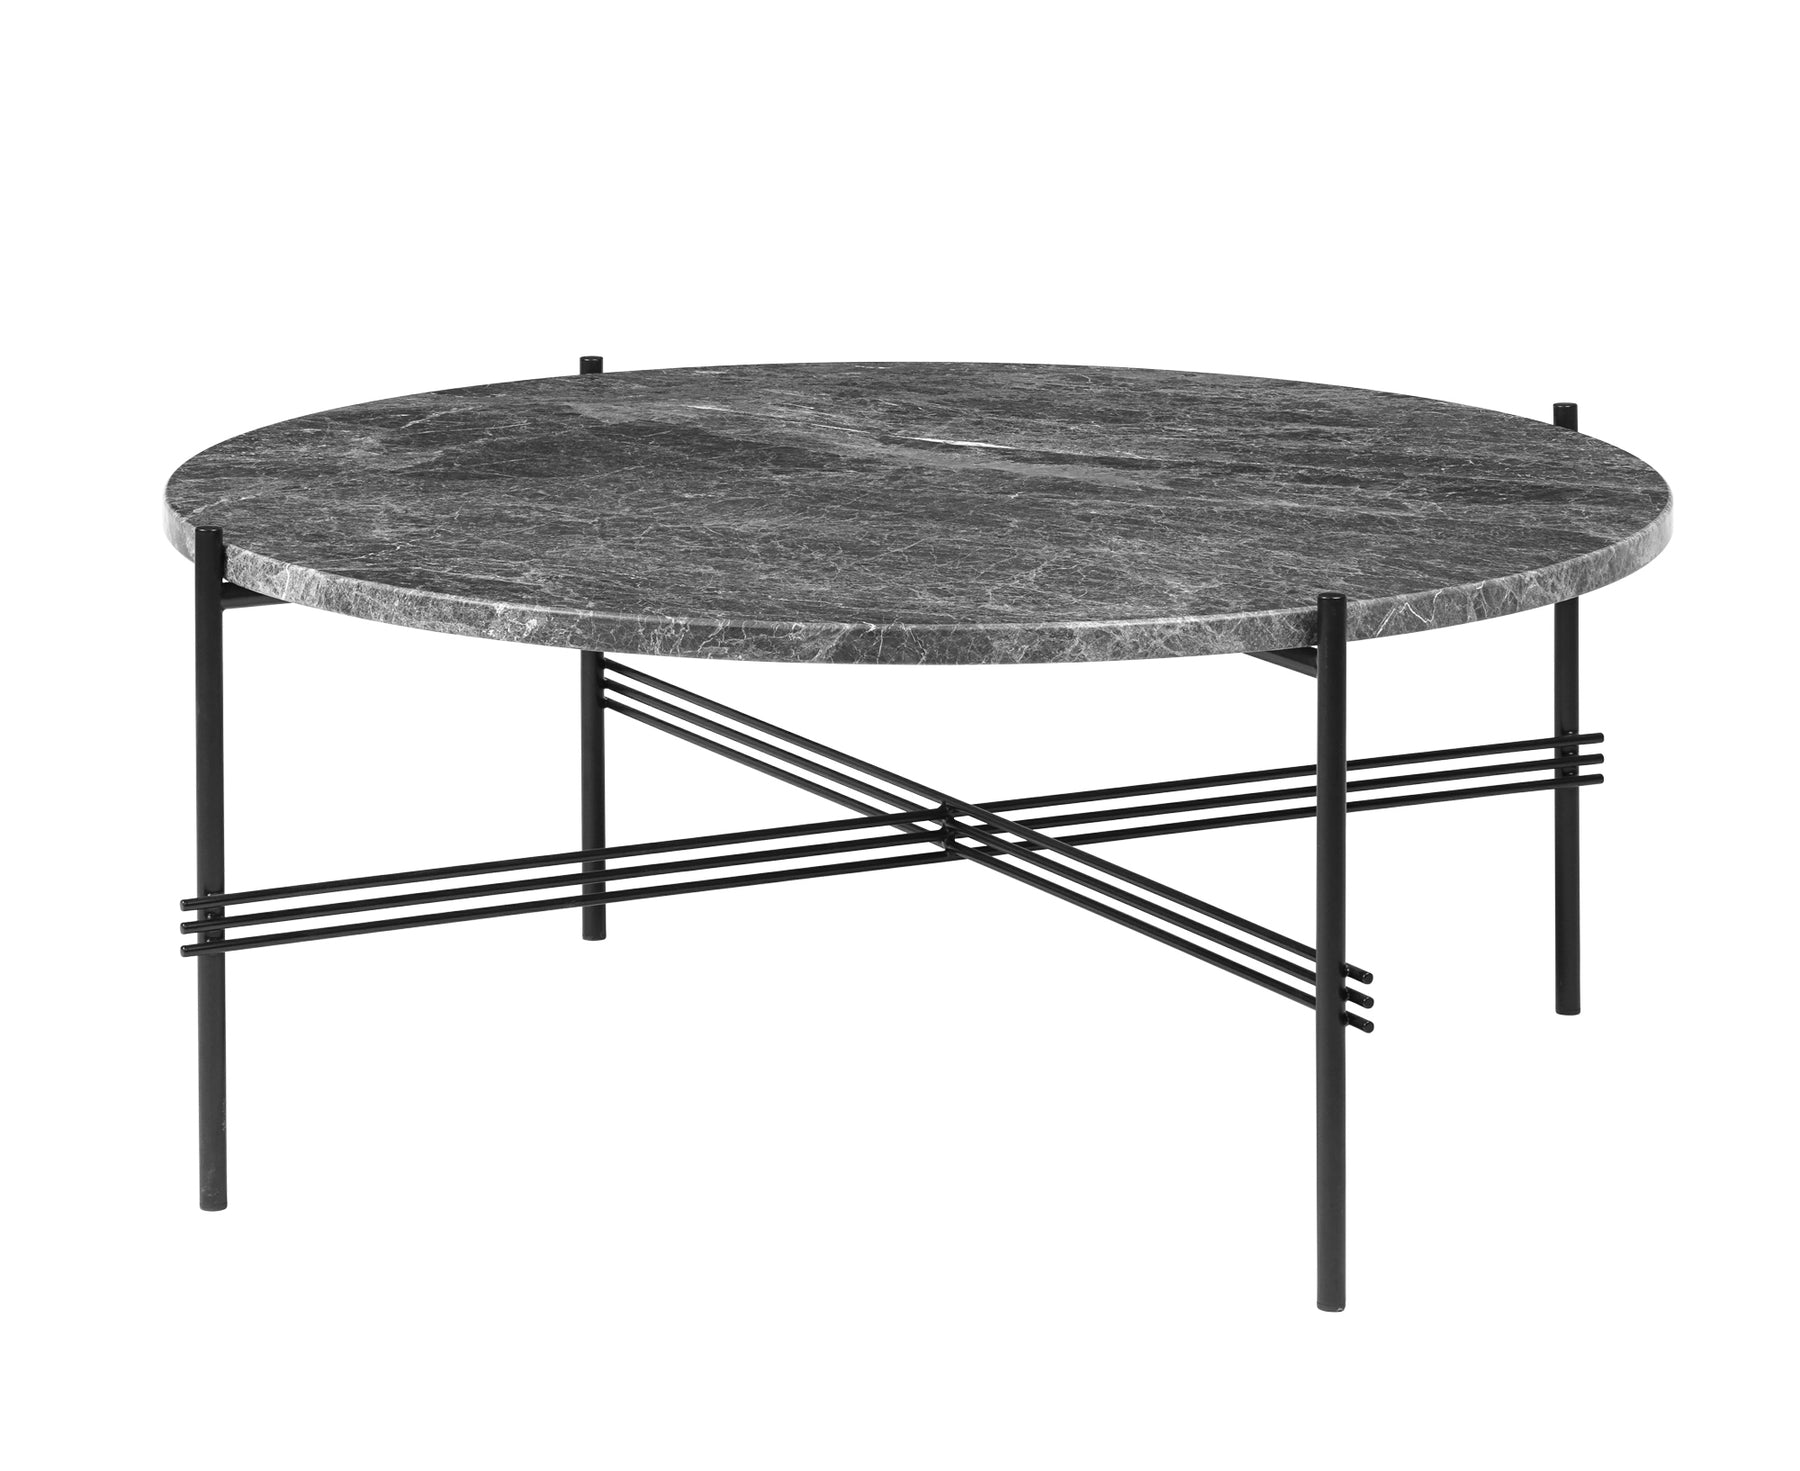 TS Lounge Table Large - Gray Marble | DSHOP